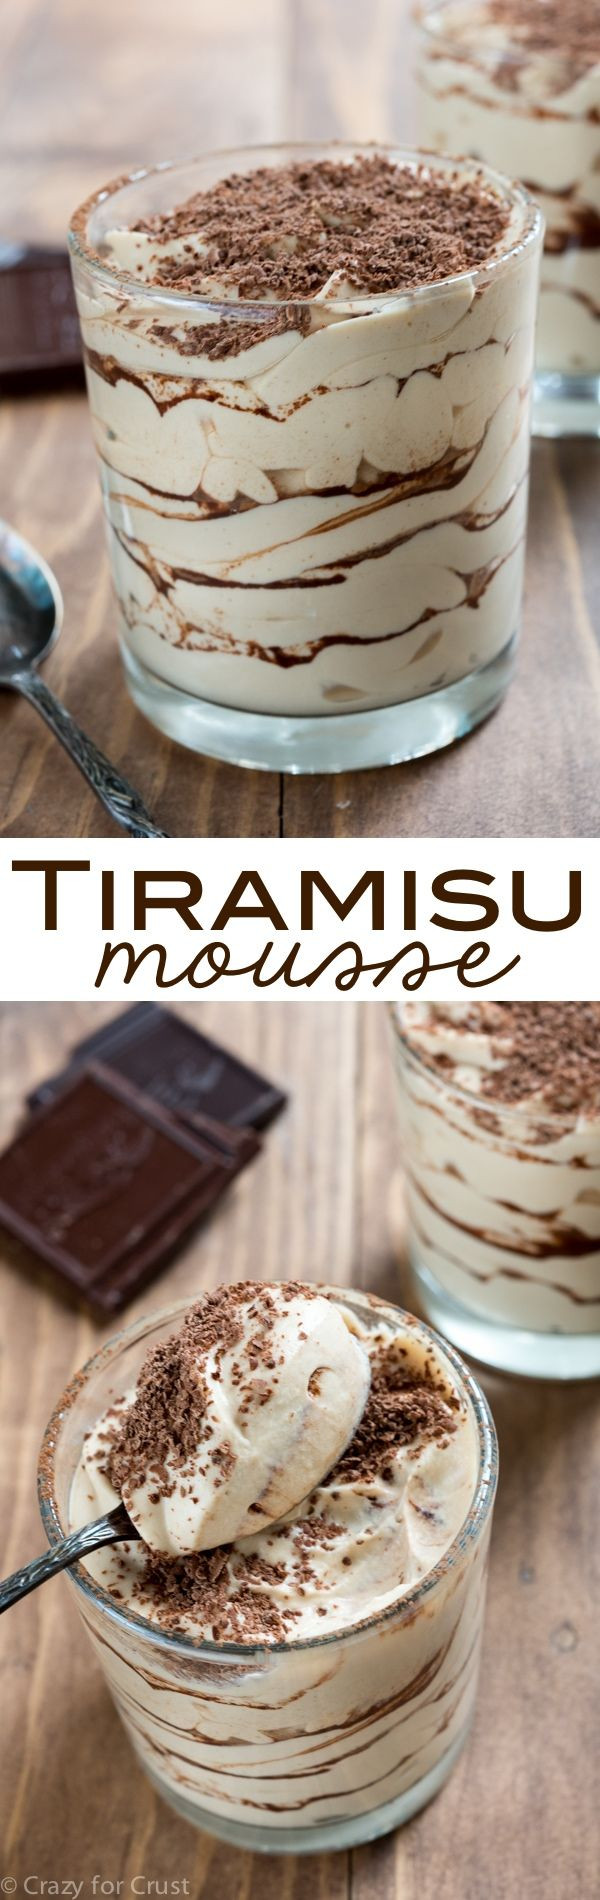 Desserts With Cocoa Powder
 Tiramisu Mousse an easy no bake dessert Layers of